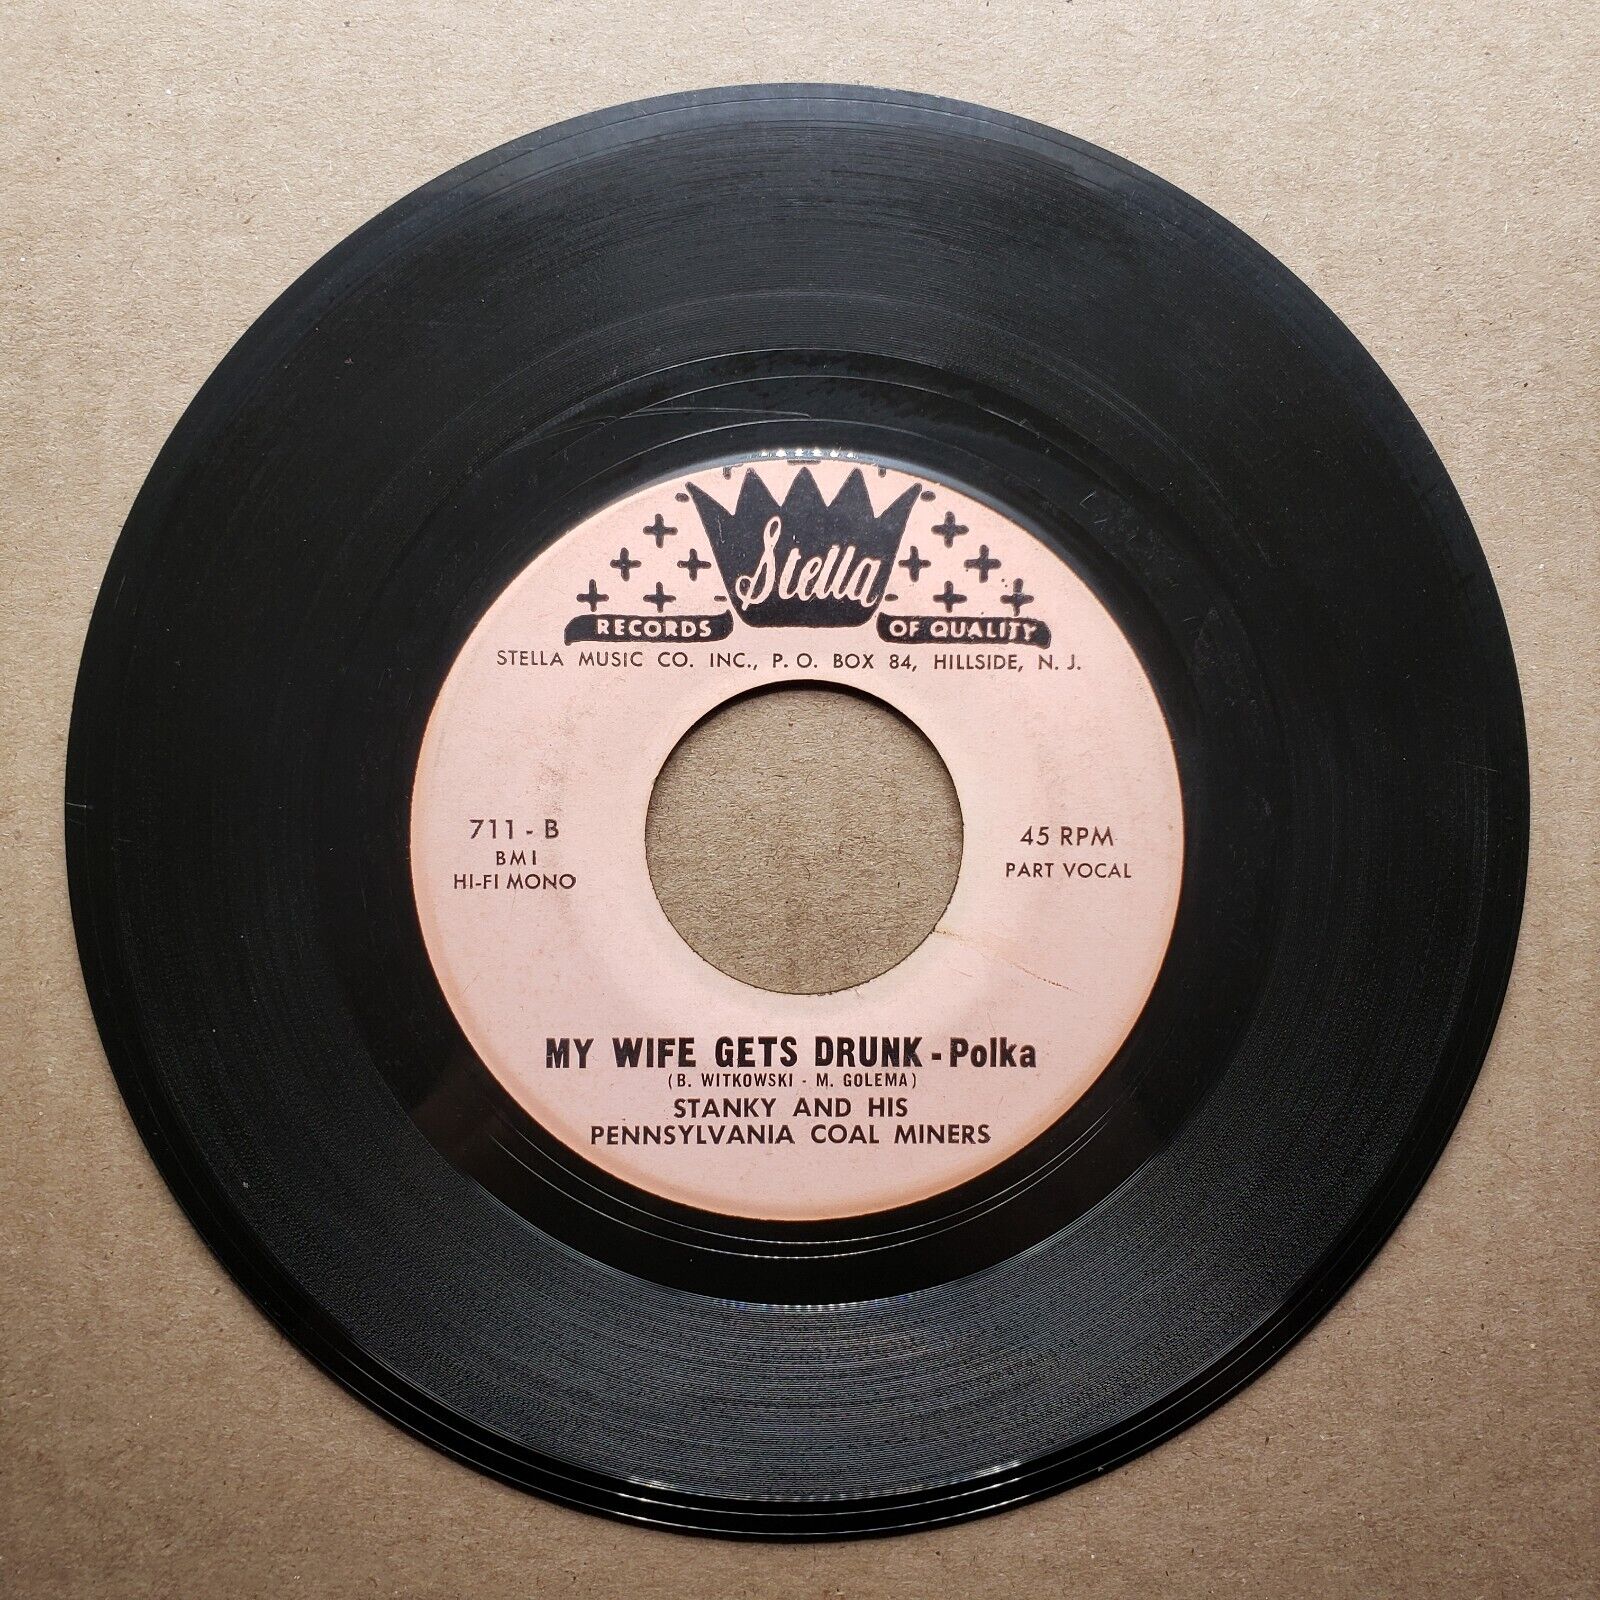 Stanky And His Pennsylvania Coal Miners - Detroid Polka; My Wife Gets D...45 RPM